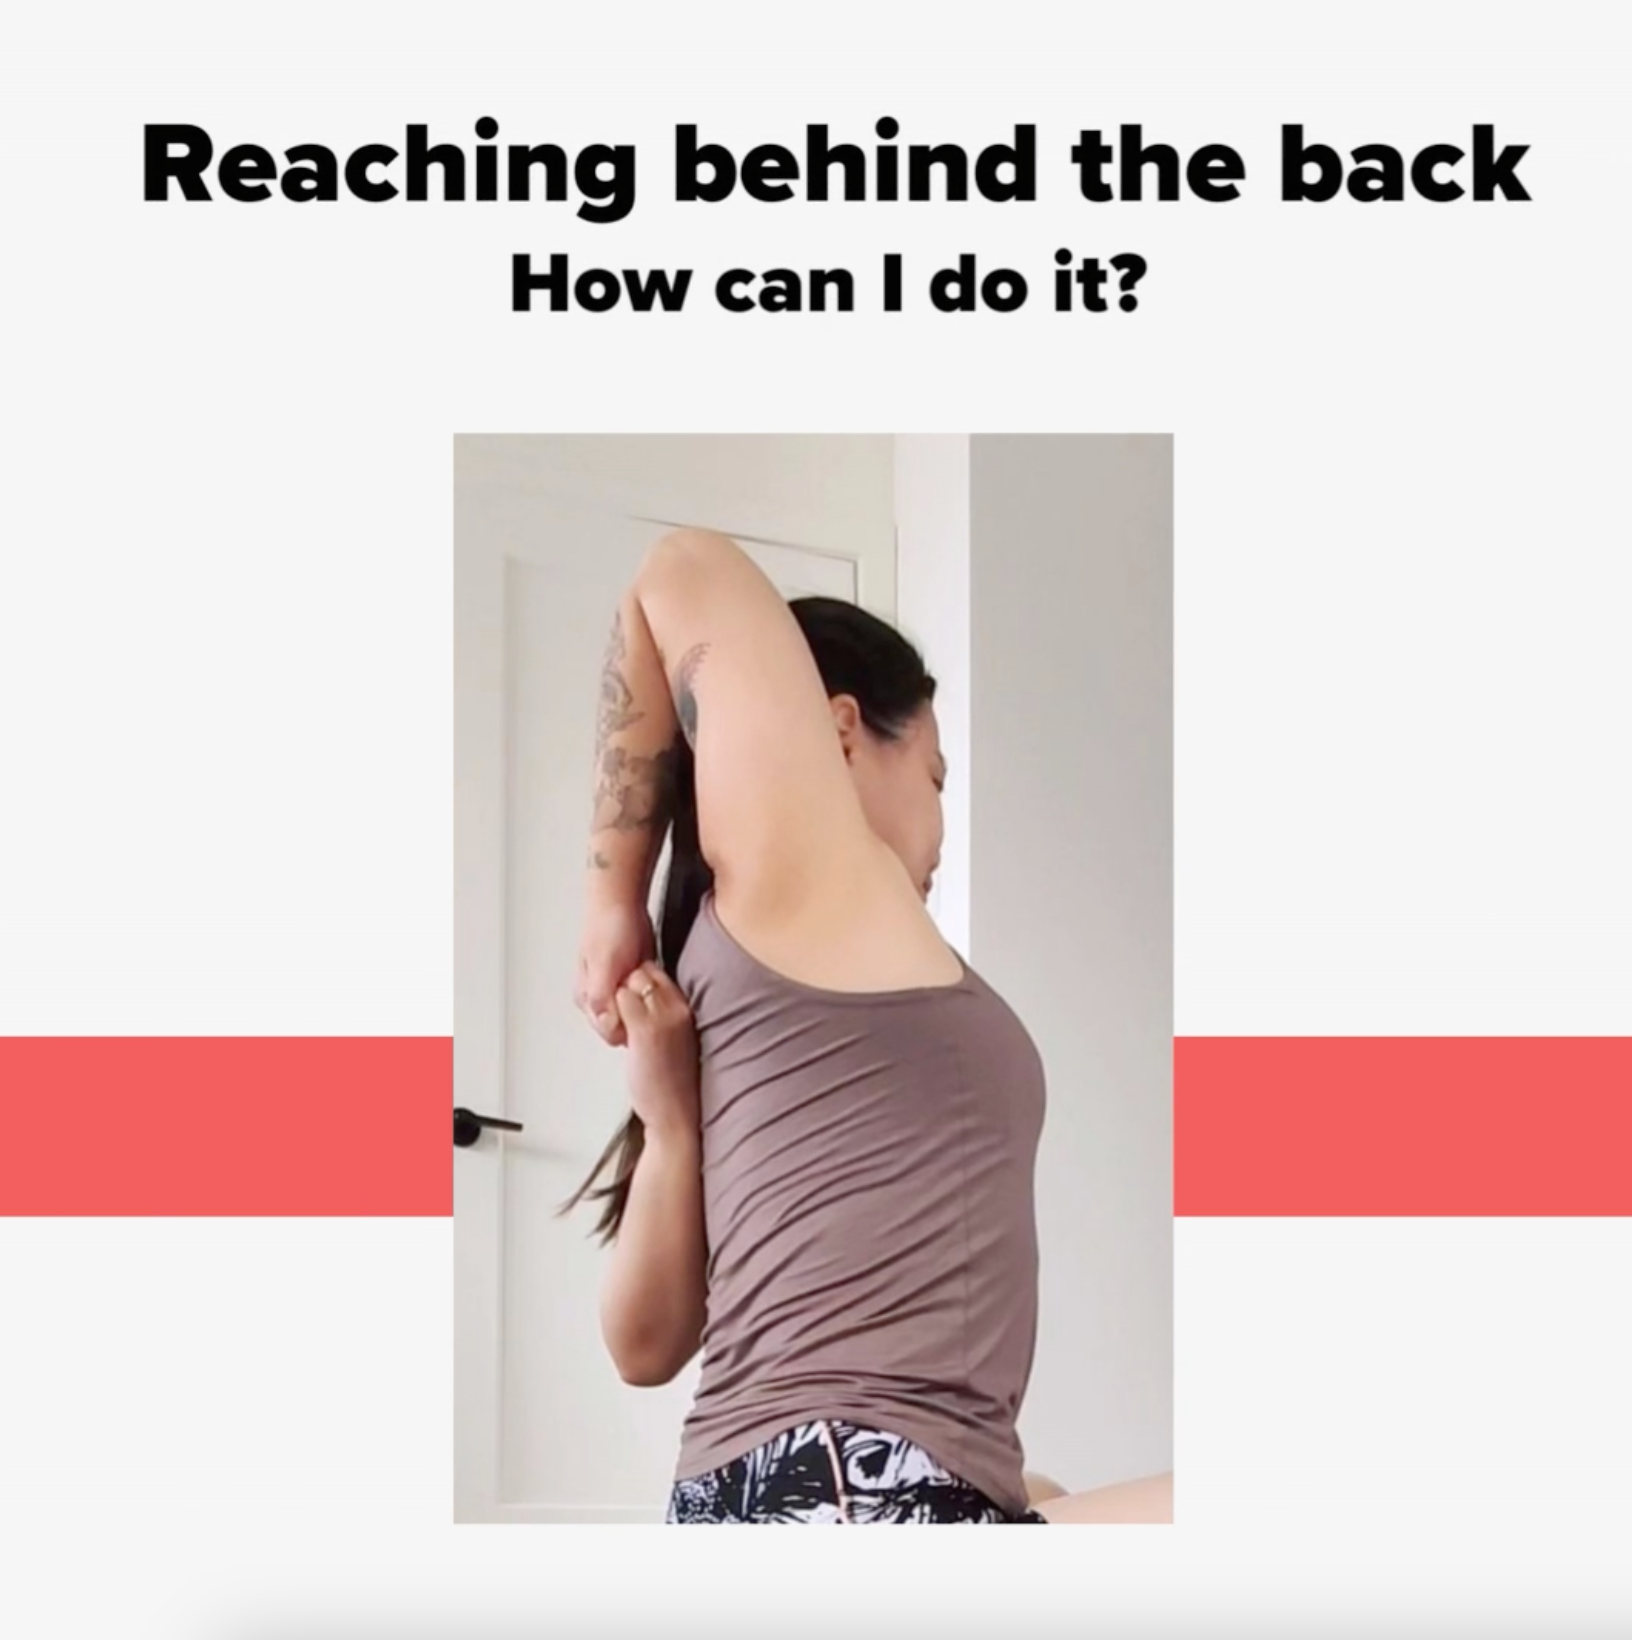 Reaching behind the back how can I do it?